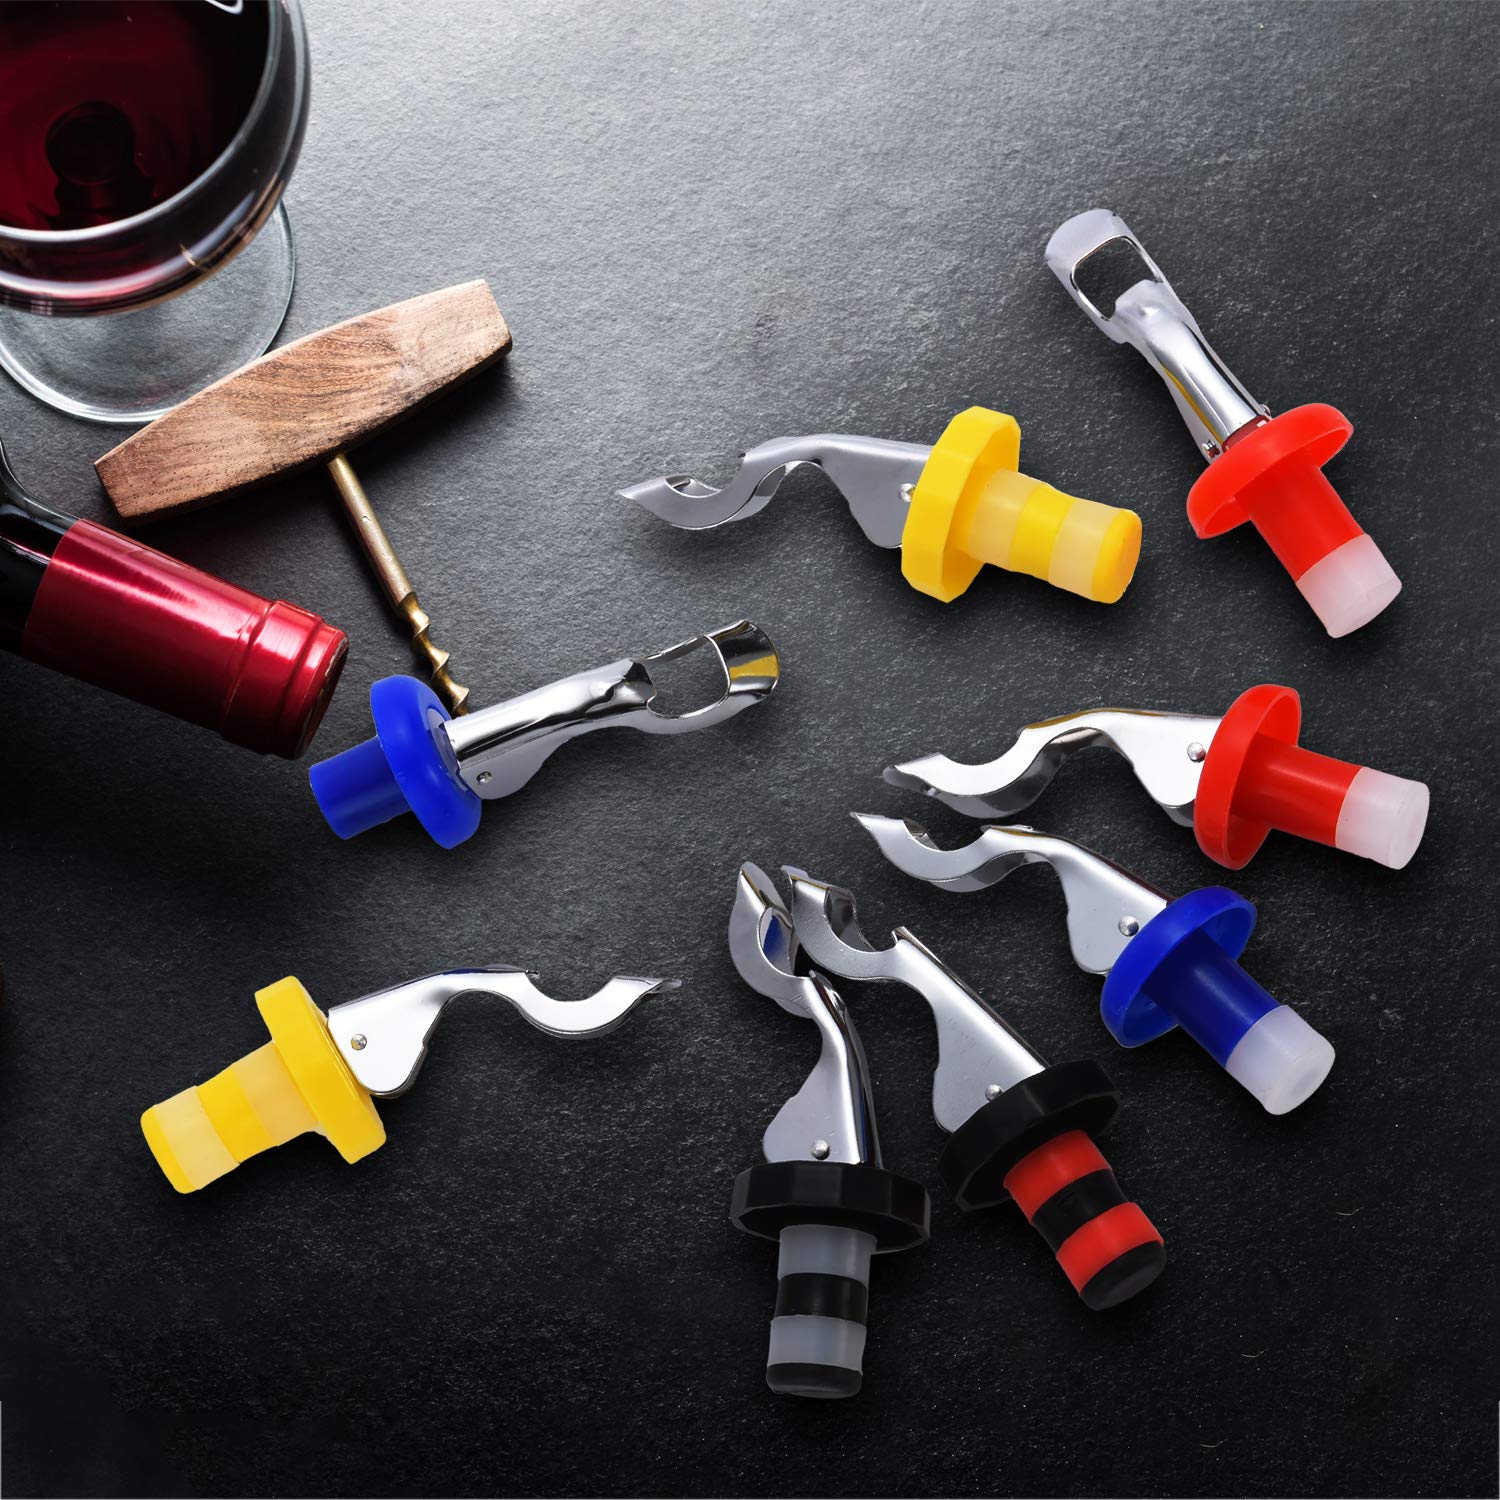 10 Pieces Silicone Wine Stoppers Expanding Manual Beverage Bottle Plug Reusable Leakproof Wine Bottle Airtight Seal Cork